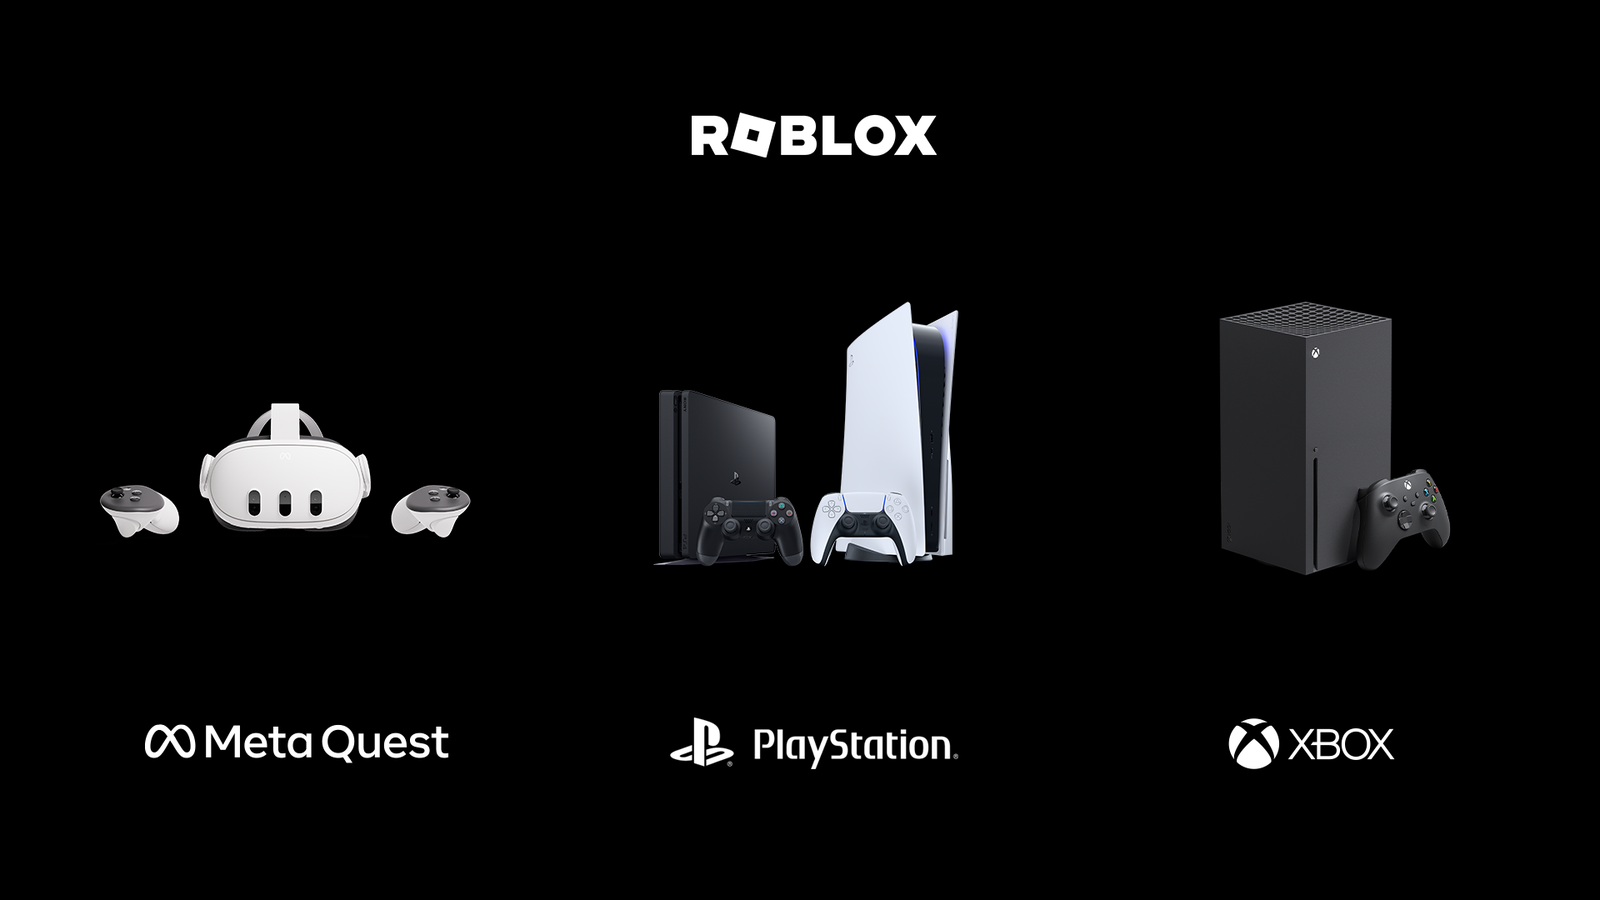 Roblox launches on PlayStation in October